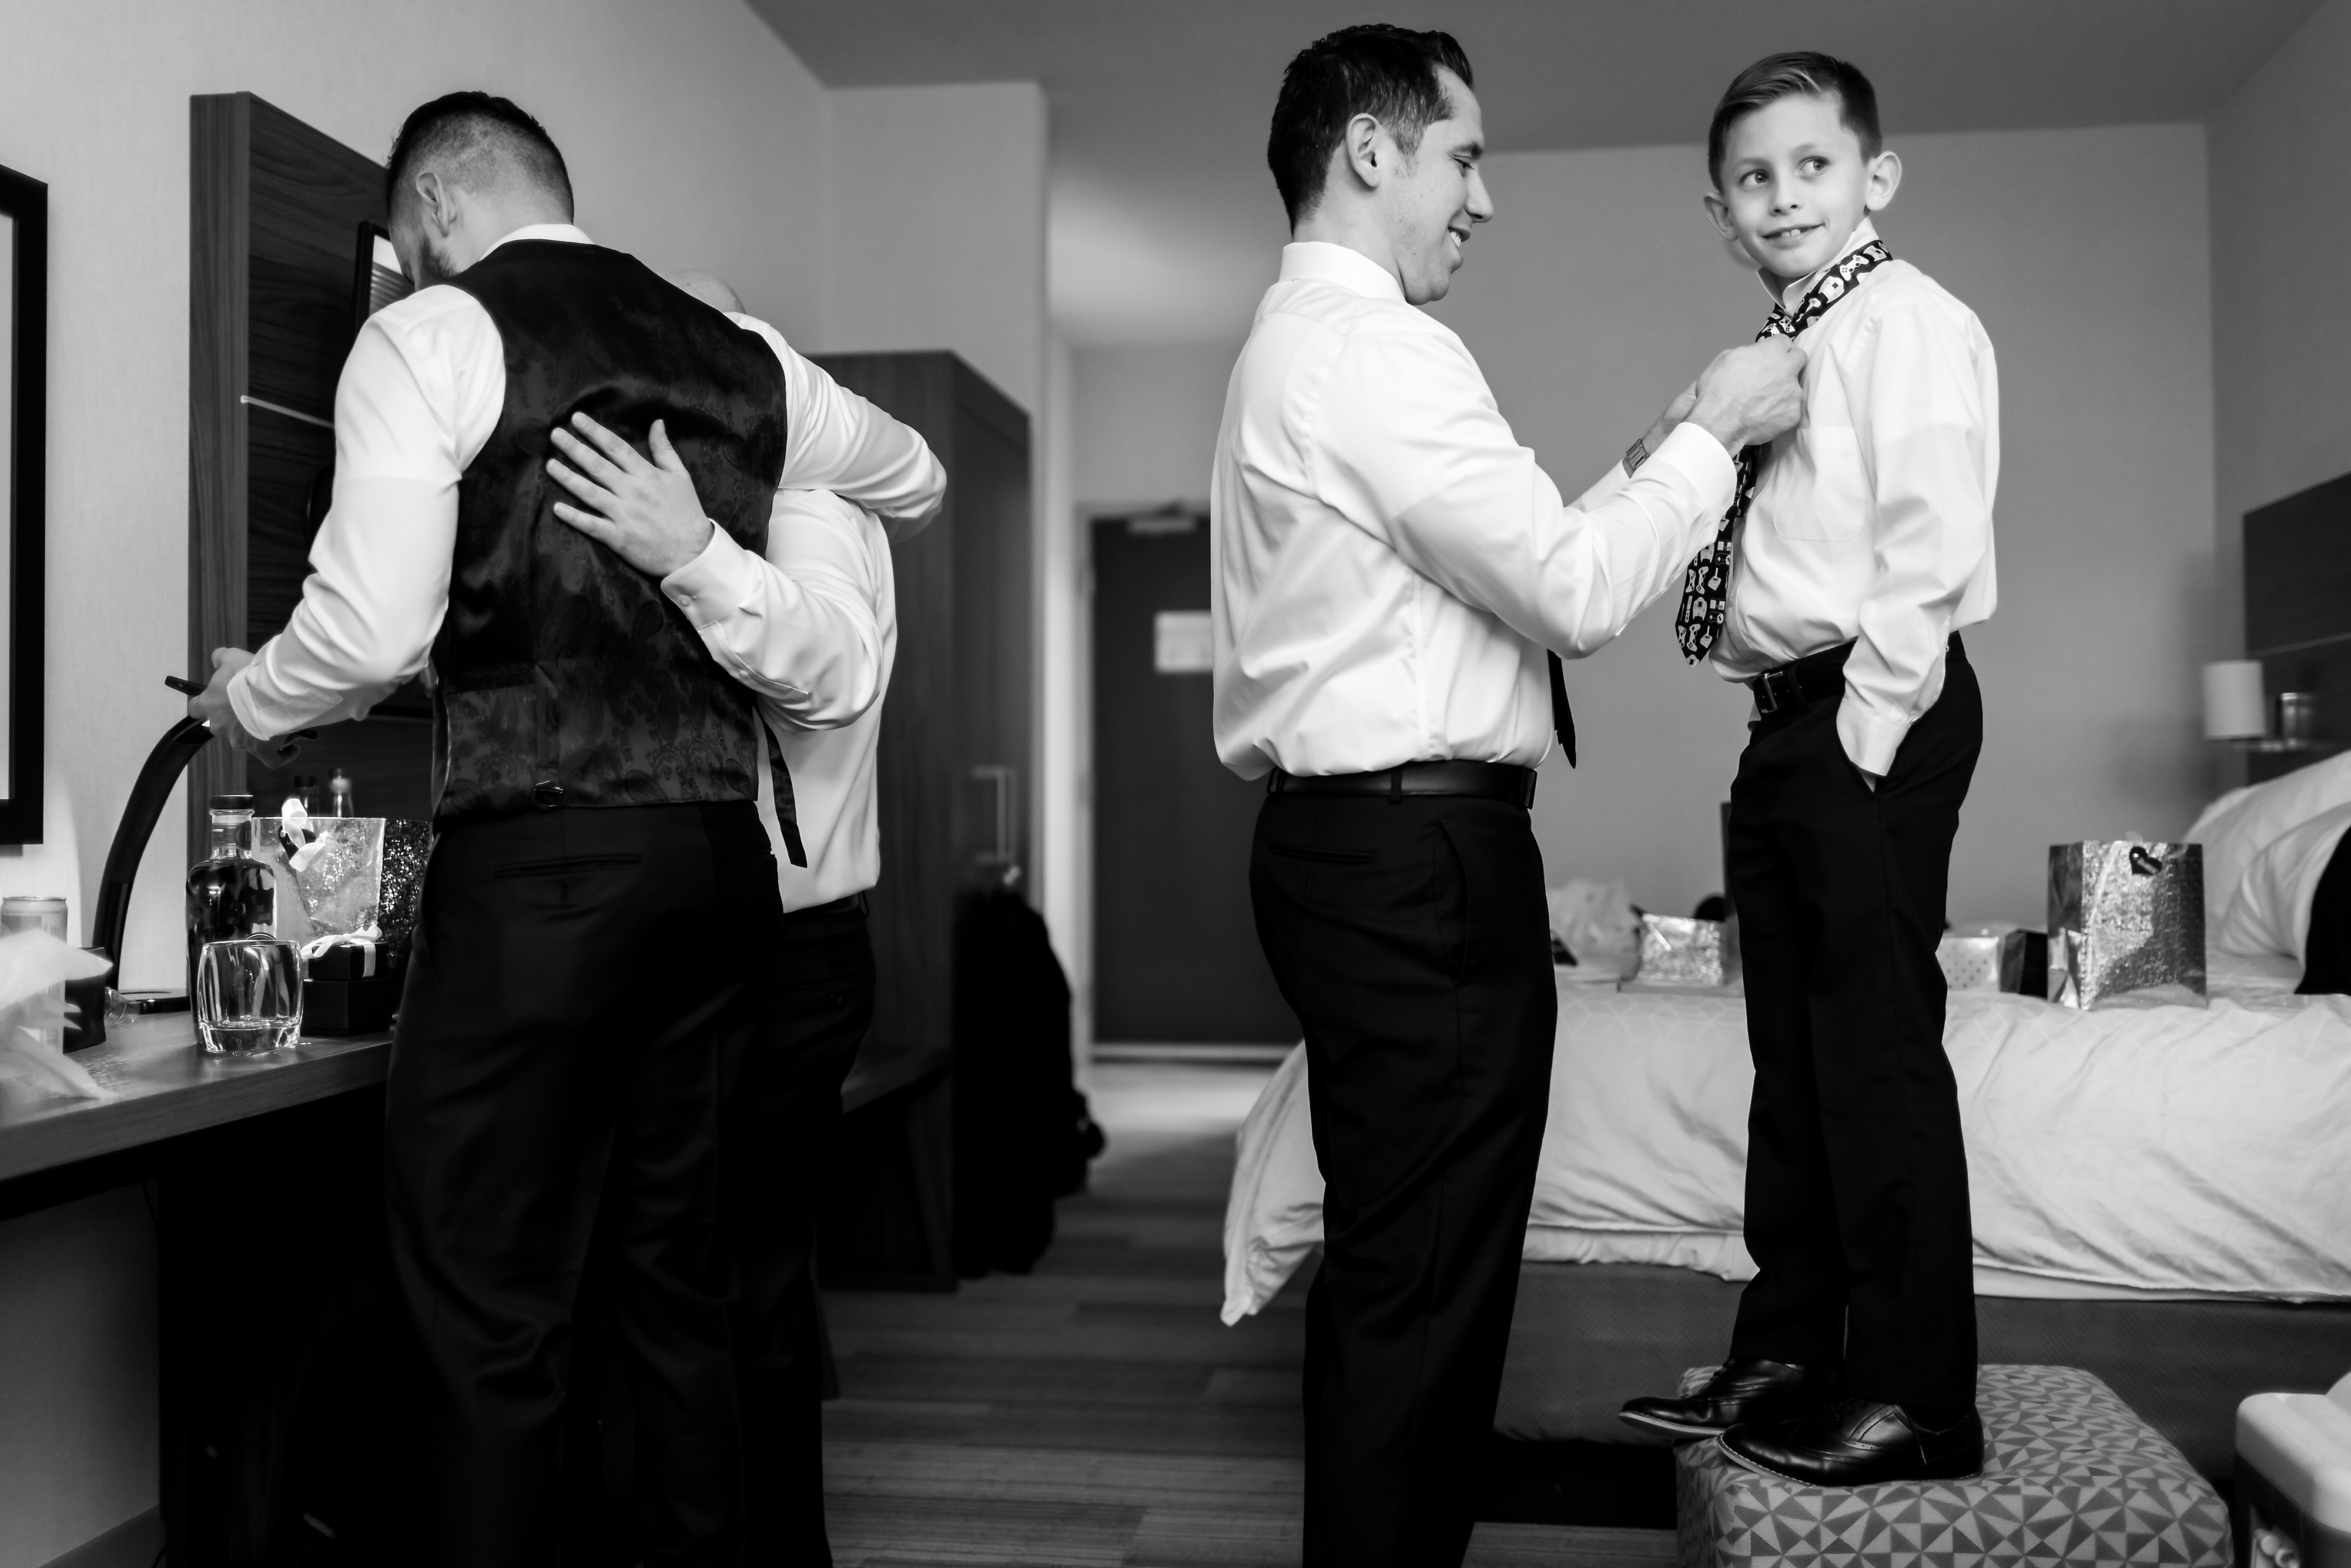 Groom and groomsmen put on ties while getting ready for wedding